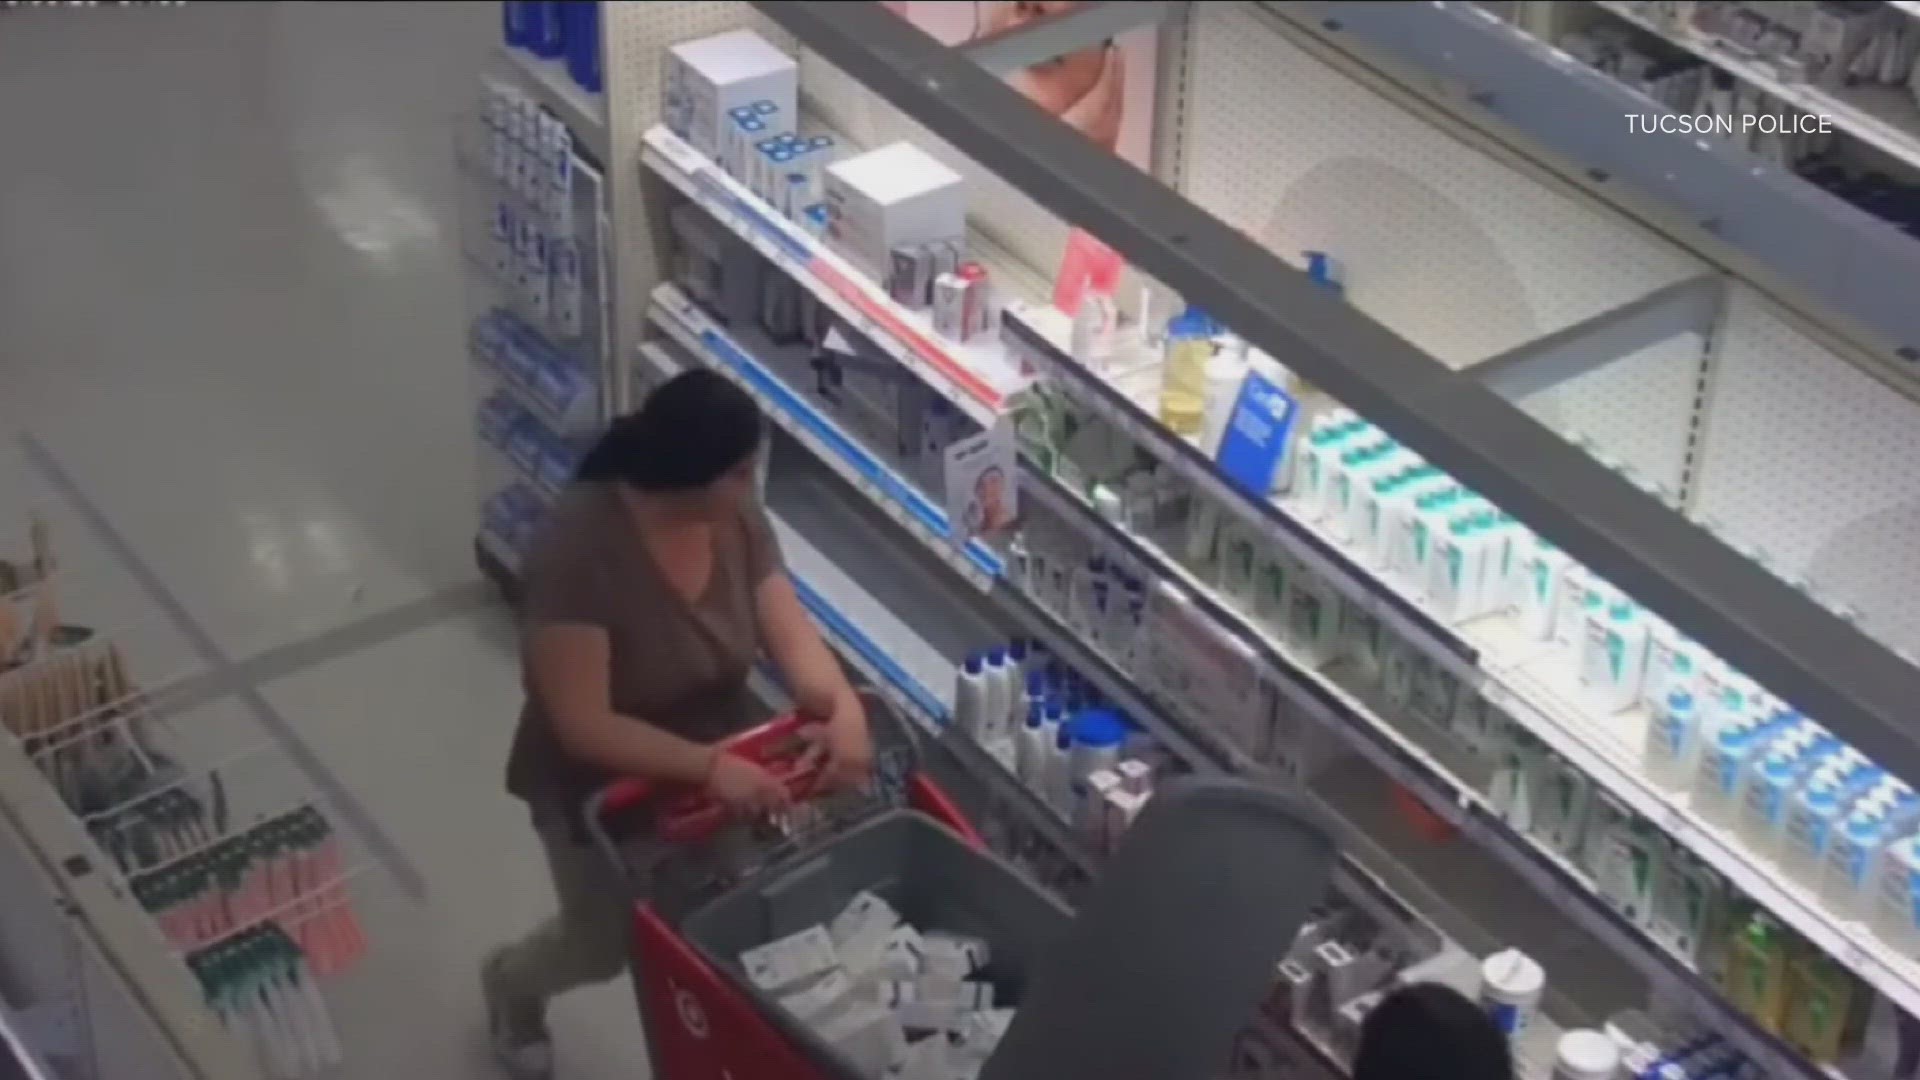 The women are accused of stealing thousands of dollars of skincare products from Target stores in Mesa and Tucson. Find out how police say it was done in the video.